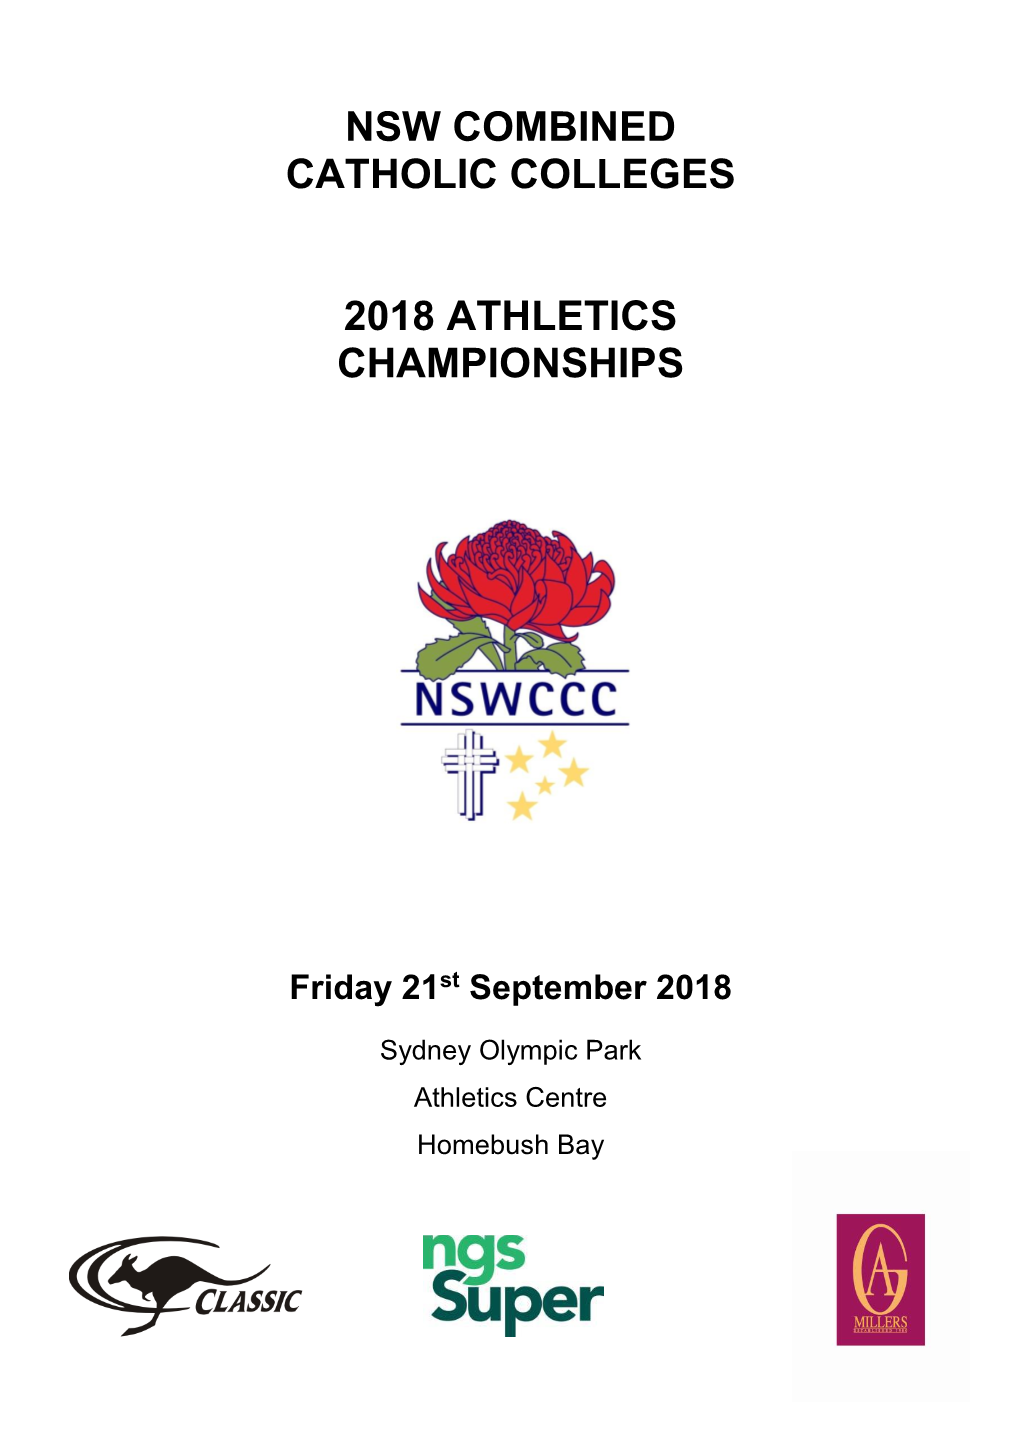 NSW Combined Catholic Colleges 2018 Athletics Championships